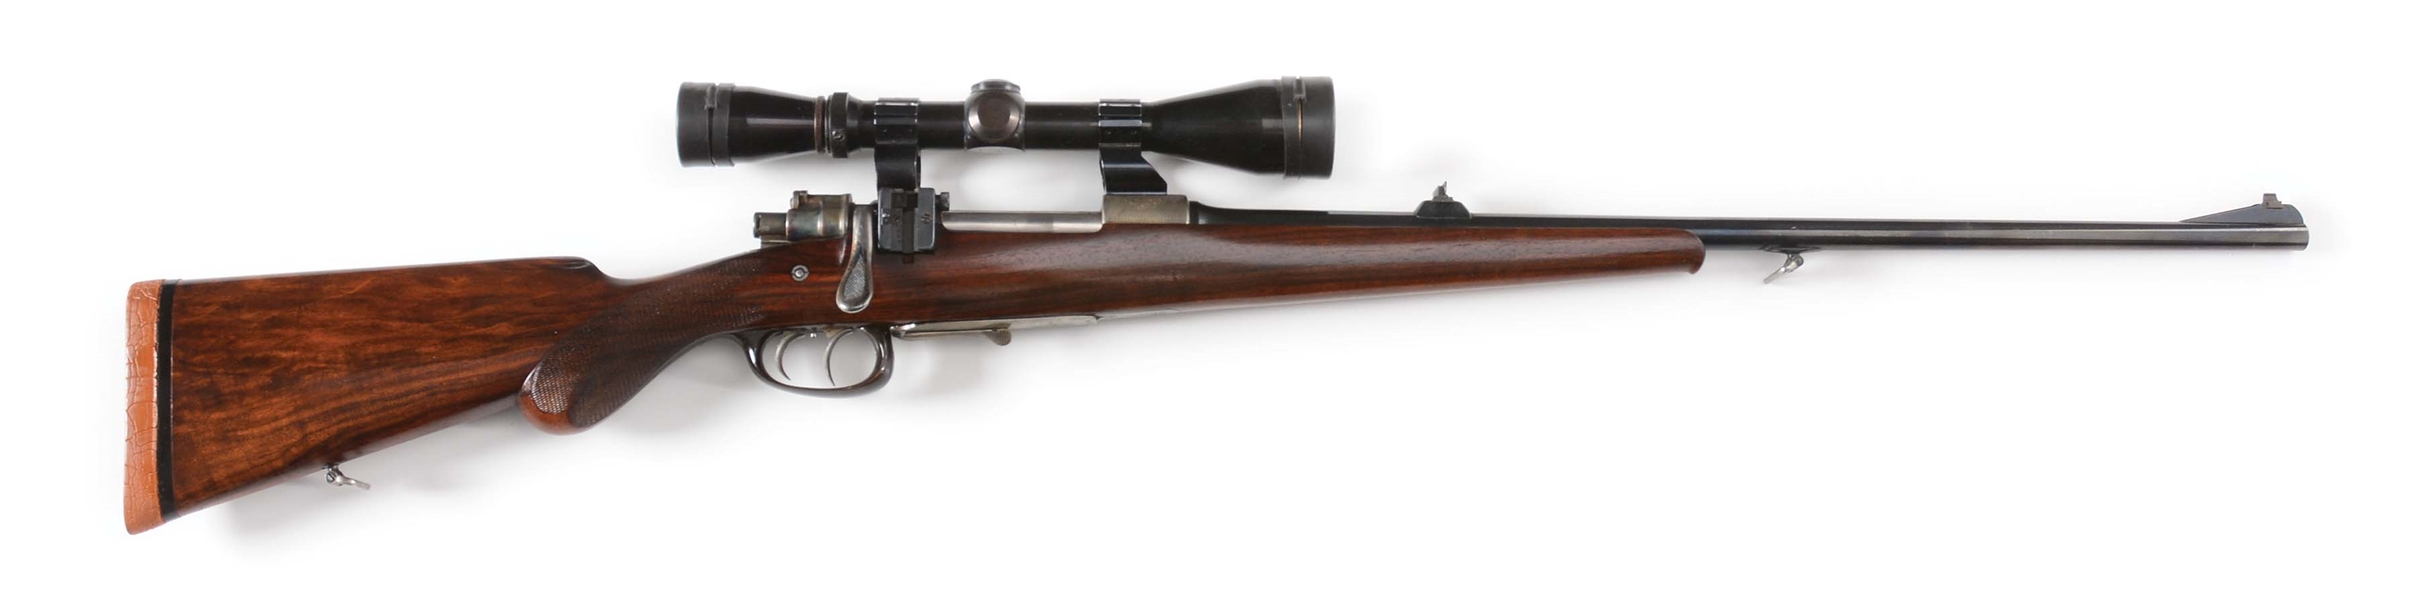 (C) MAUSER SPORTER BOLT ACTION RIFLE WITH SCOPE.